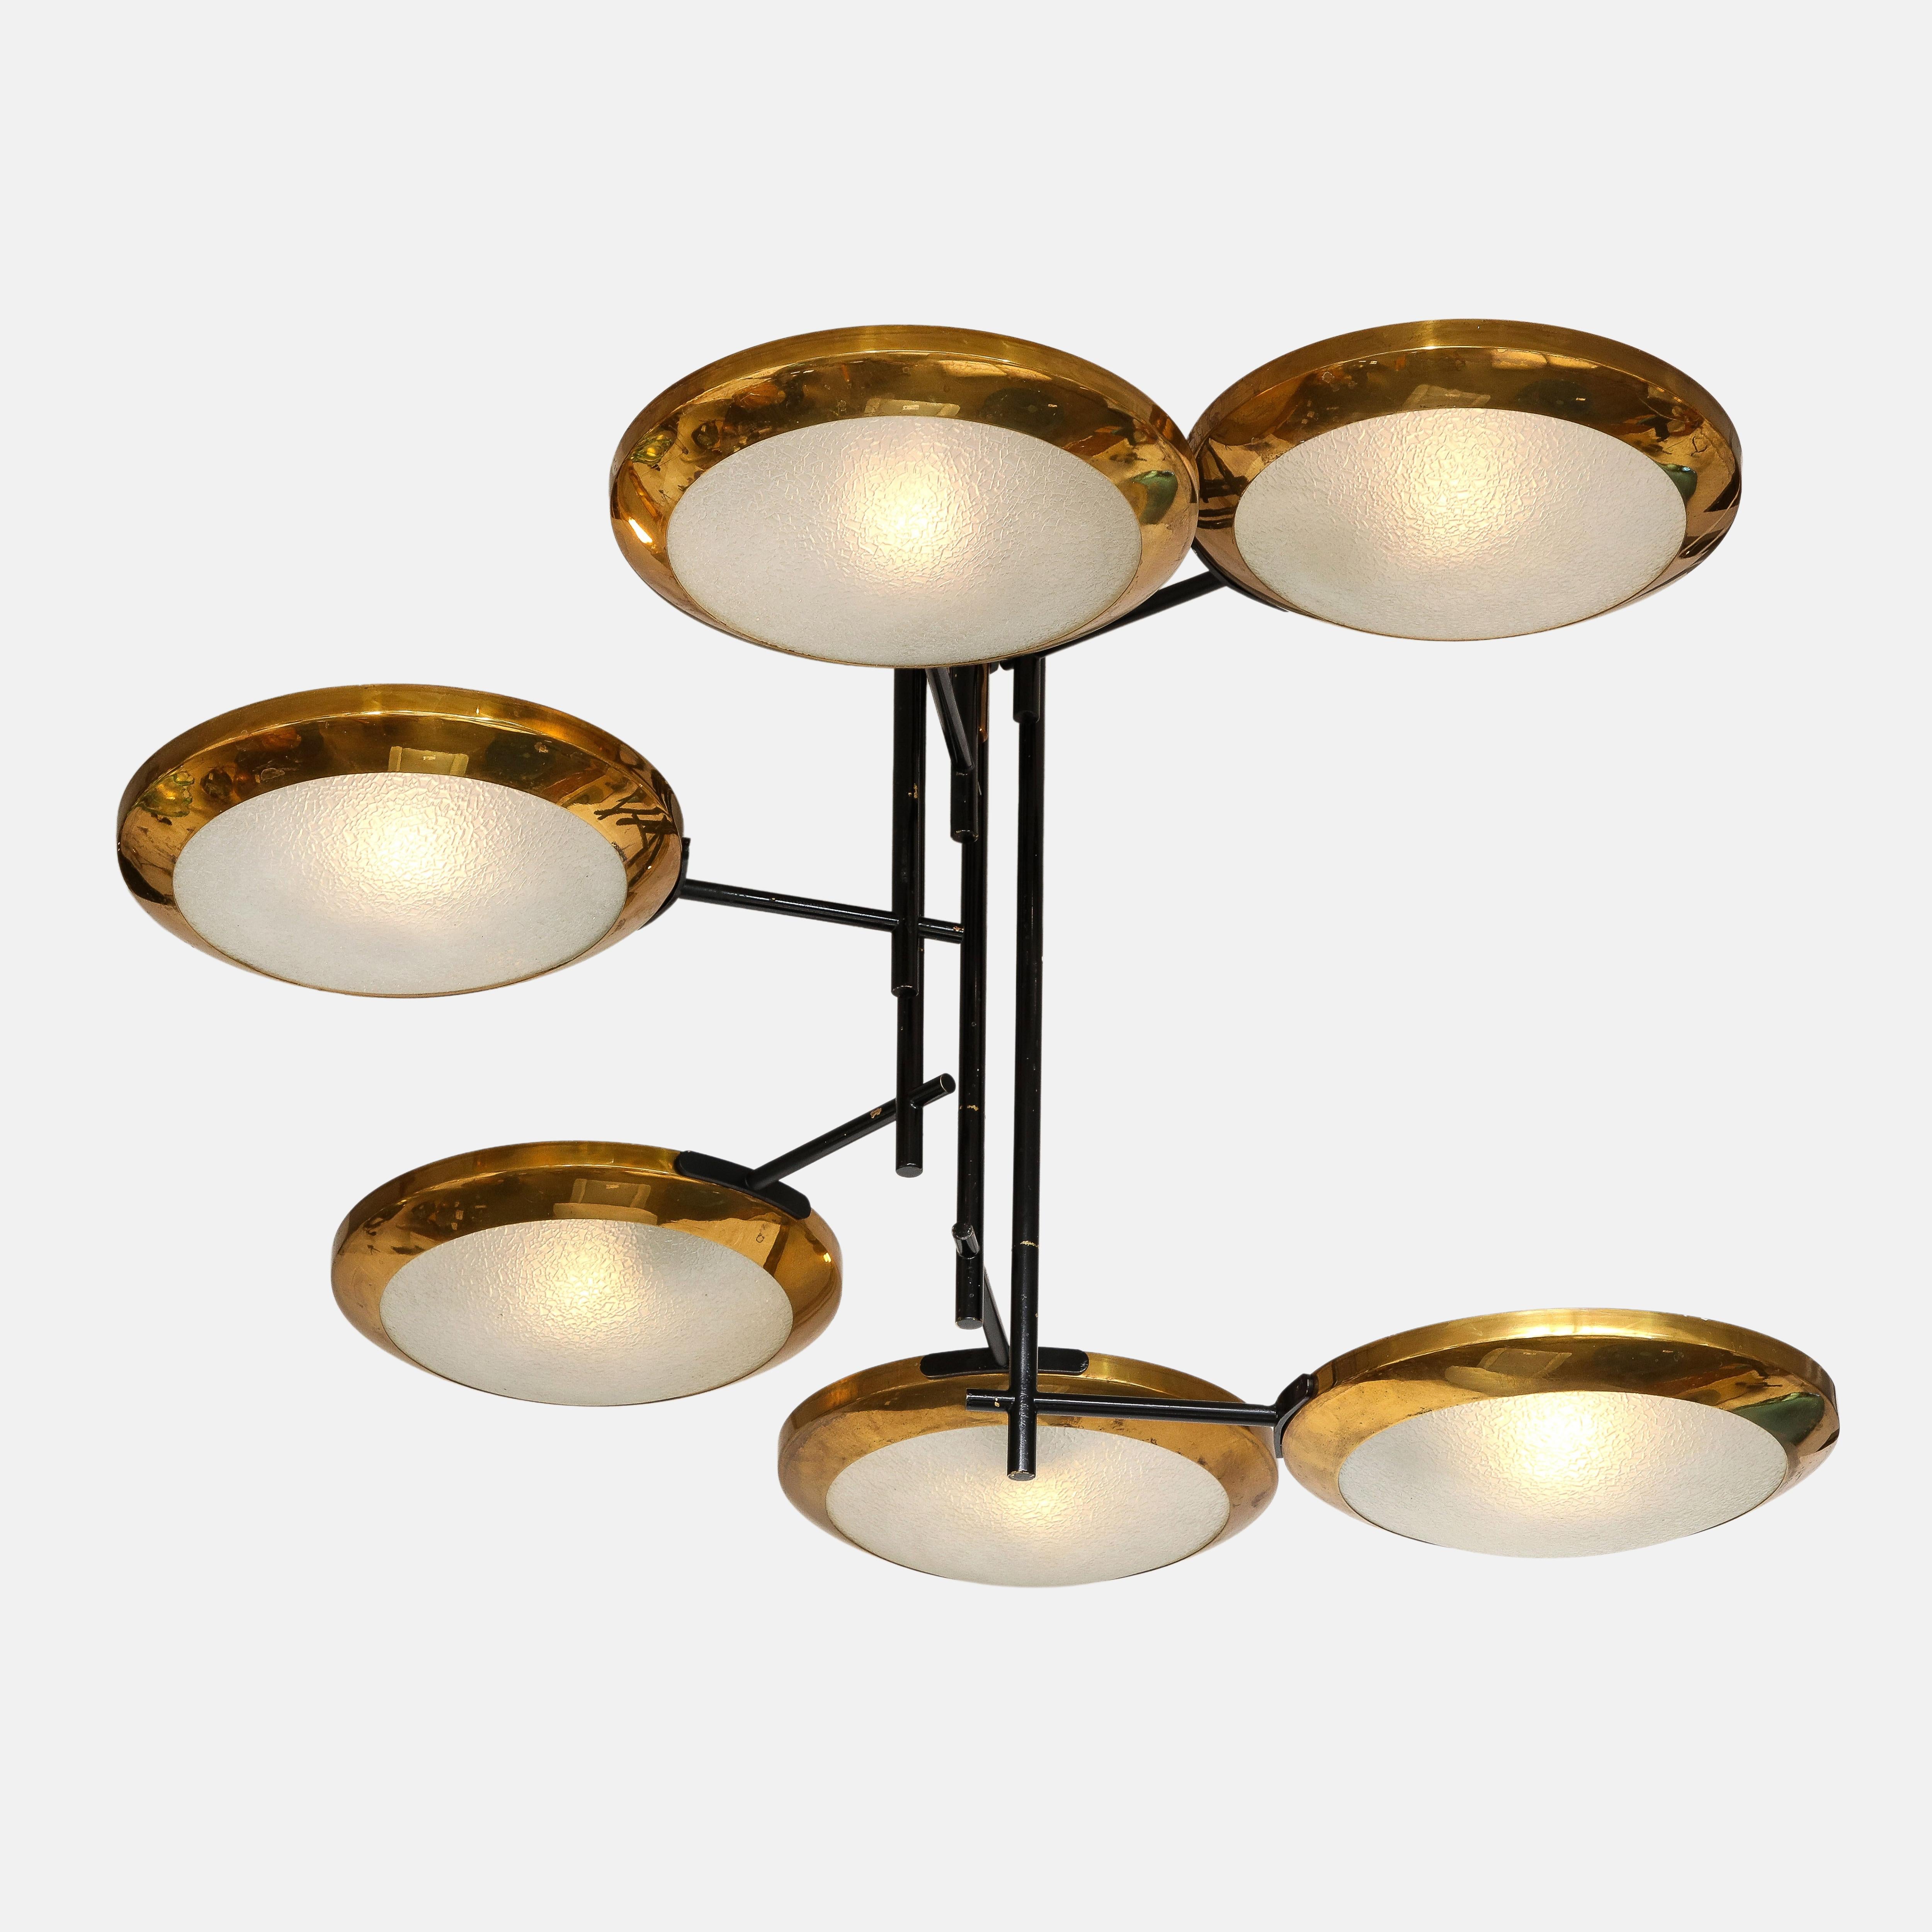 Stilnovo rare chandelier consisting of six circular brass framed lights with textured acid-etched glass diffusers suspended at alternating heights from three black-painted stems or enameled steel rods with original canopy, Italy, 1950s.  This chic